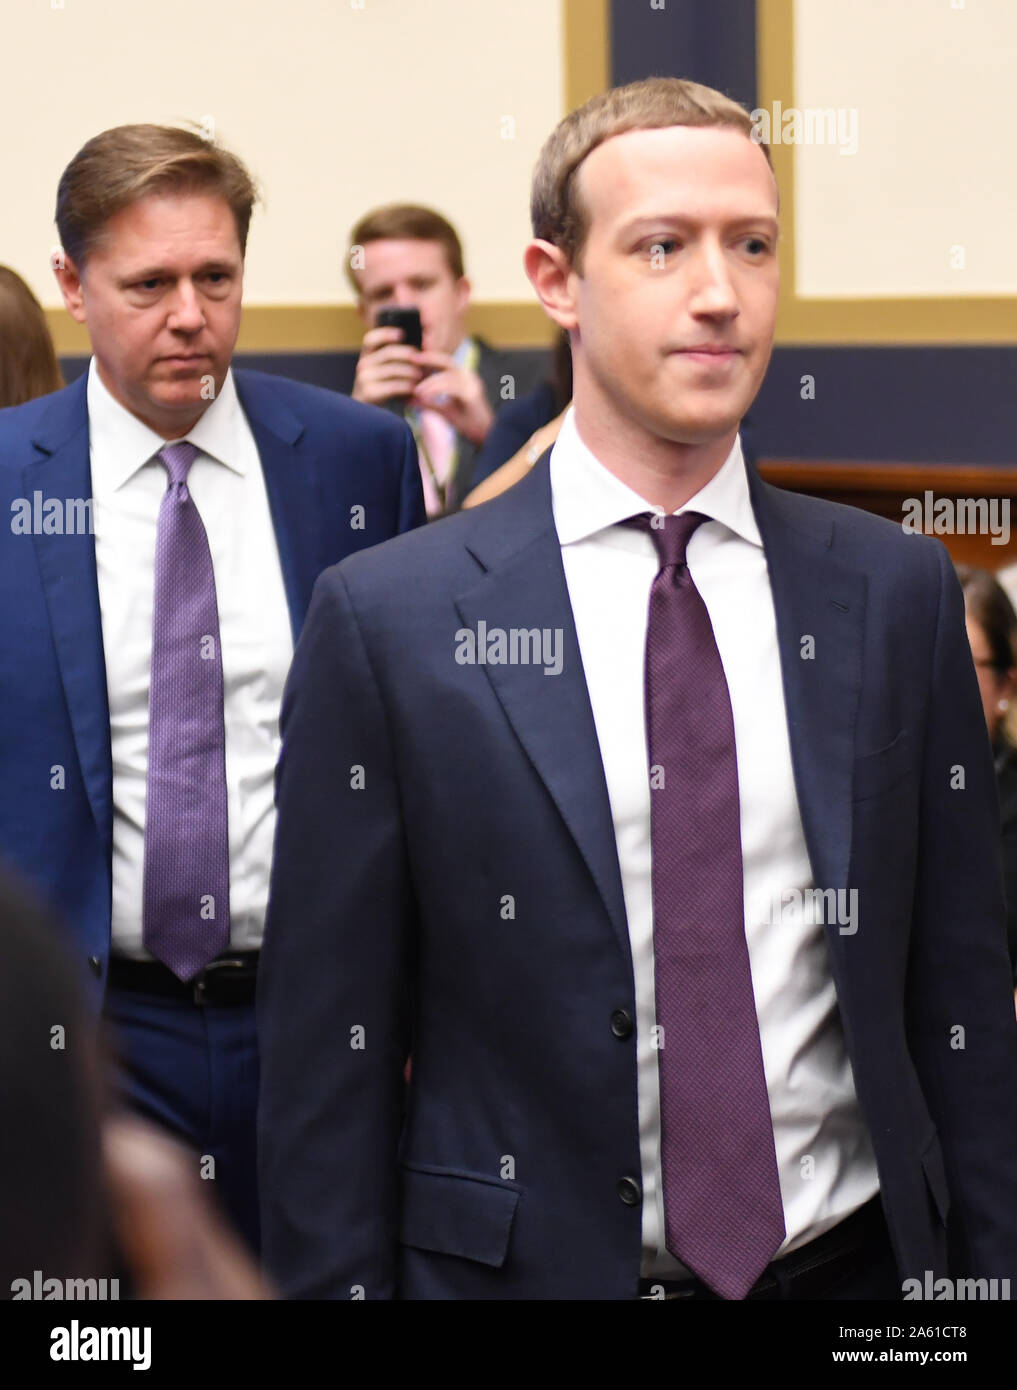 Washington, United States. 23rd Oct, 2019. Facebook CEO Mark Zuckerberg arrives to testify before a Congressional hearing on 'An Examination of Facebook and Its Impact on the Financial Services and Housing Sectors' on Capitol Hill in Washington, DC on Wednesday, October 23, 2019. Photo by Pat Benic/UPI Credit: UPI/Alamy Live News Stock Photo